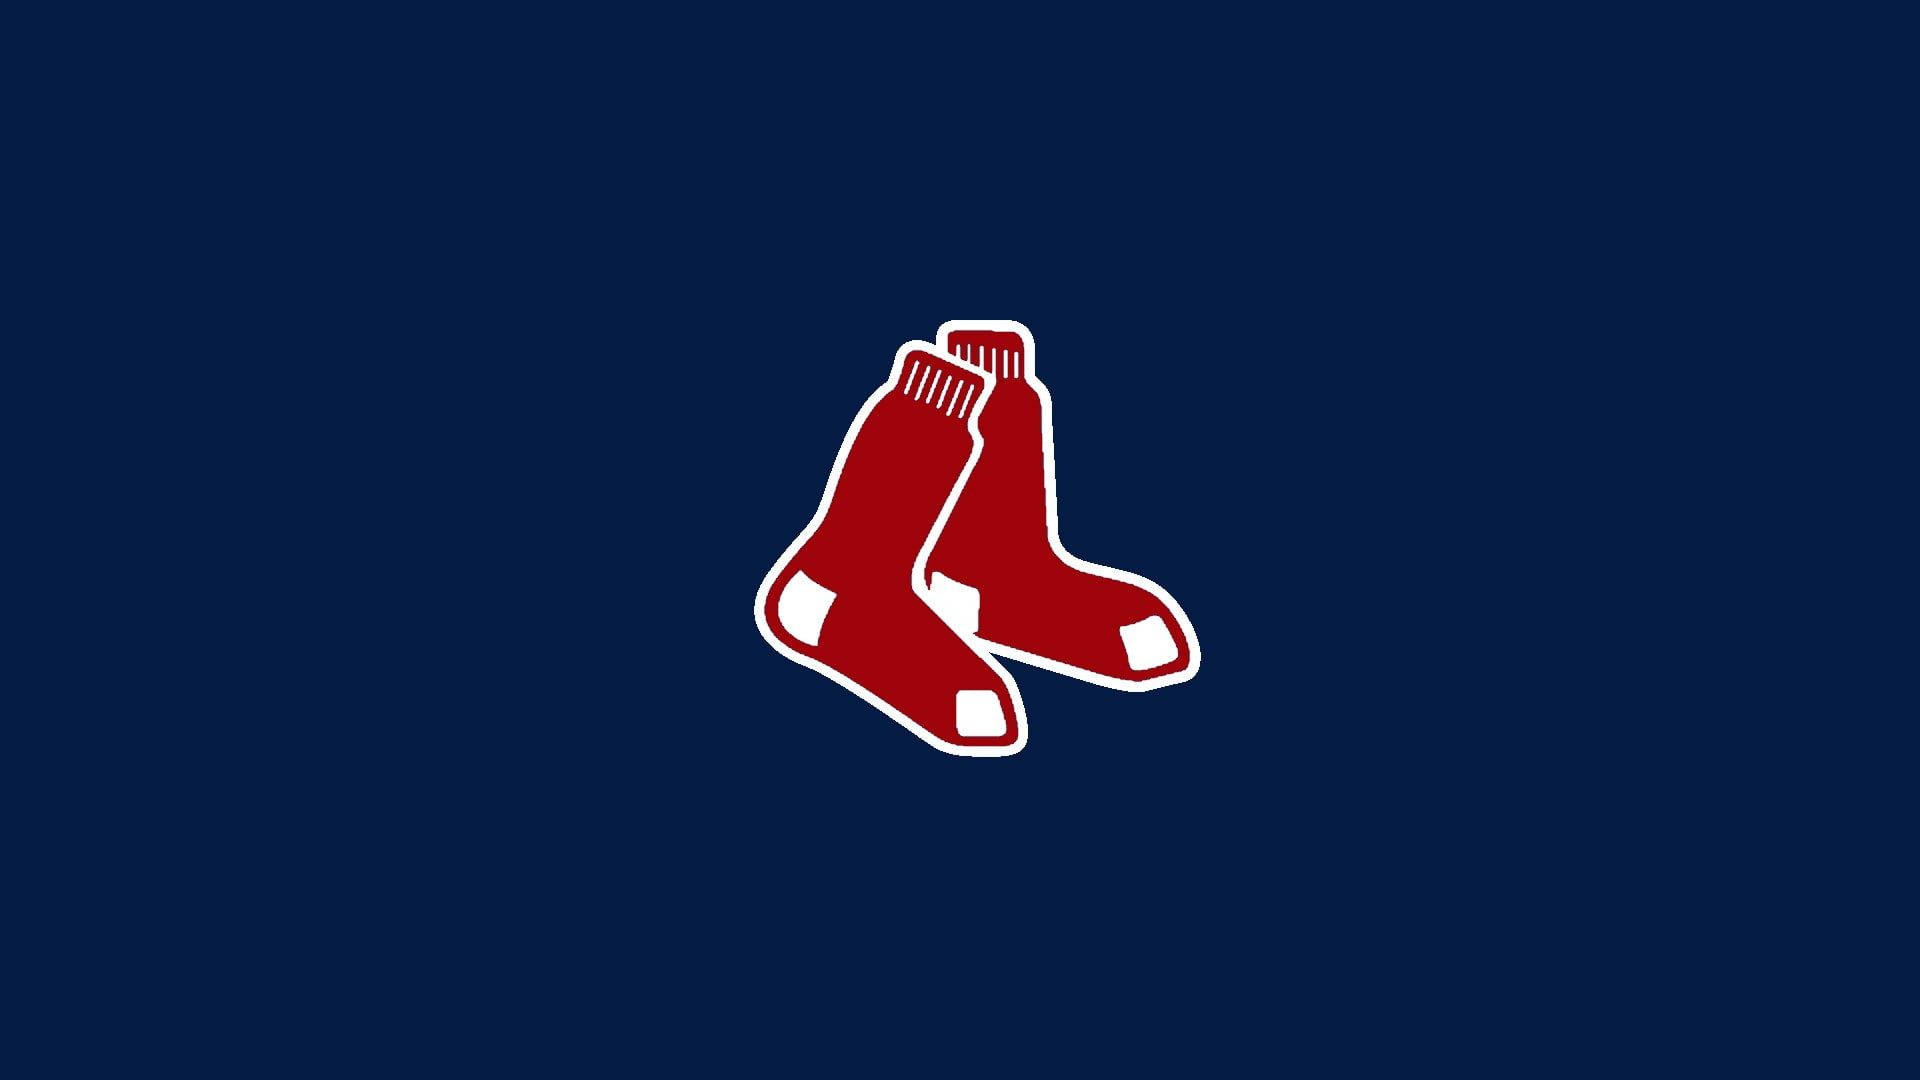 100+] Boston Red Sox Backgrounds